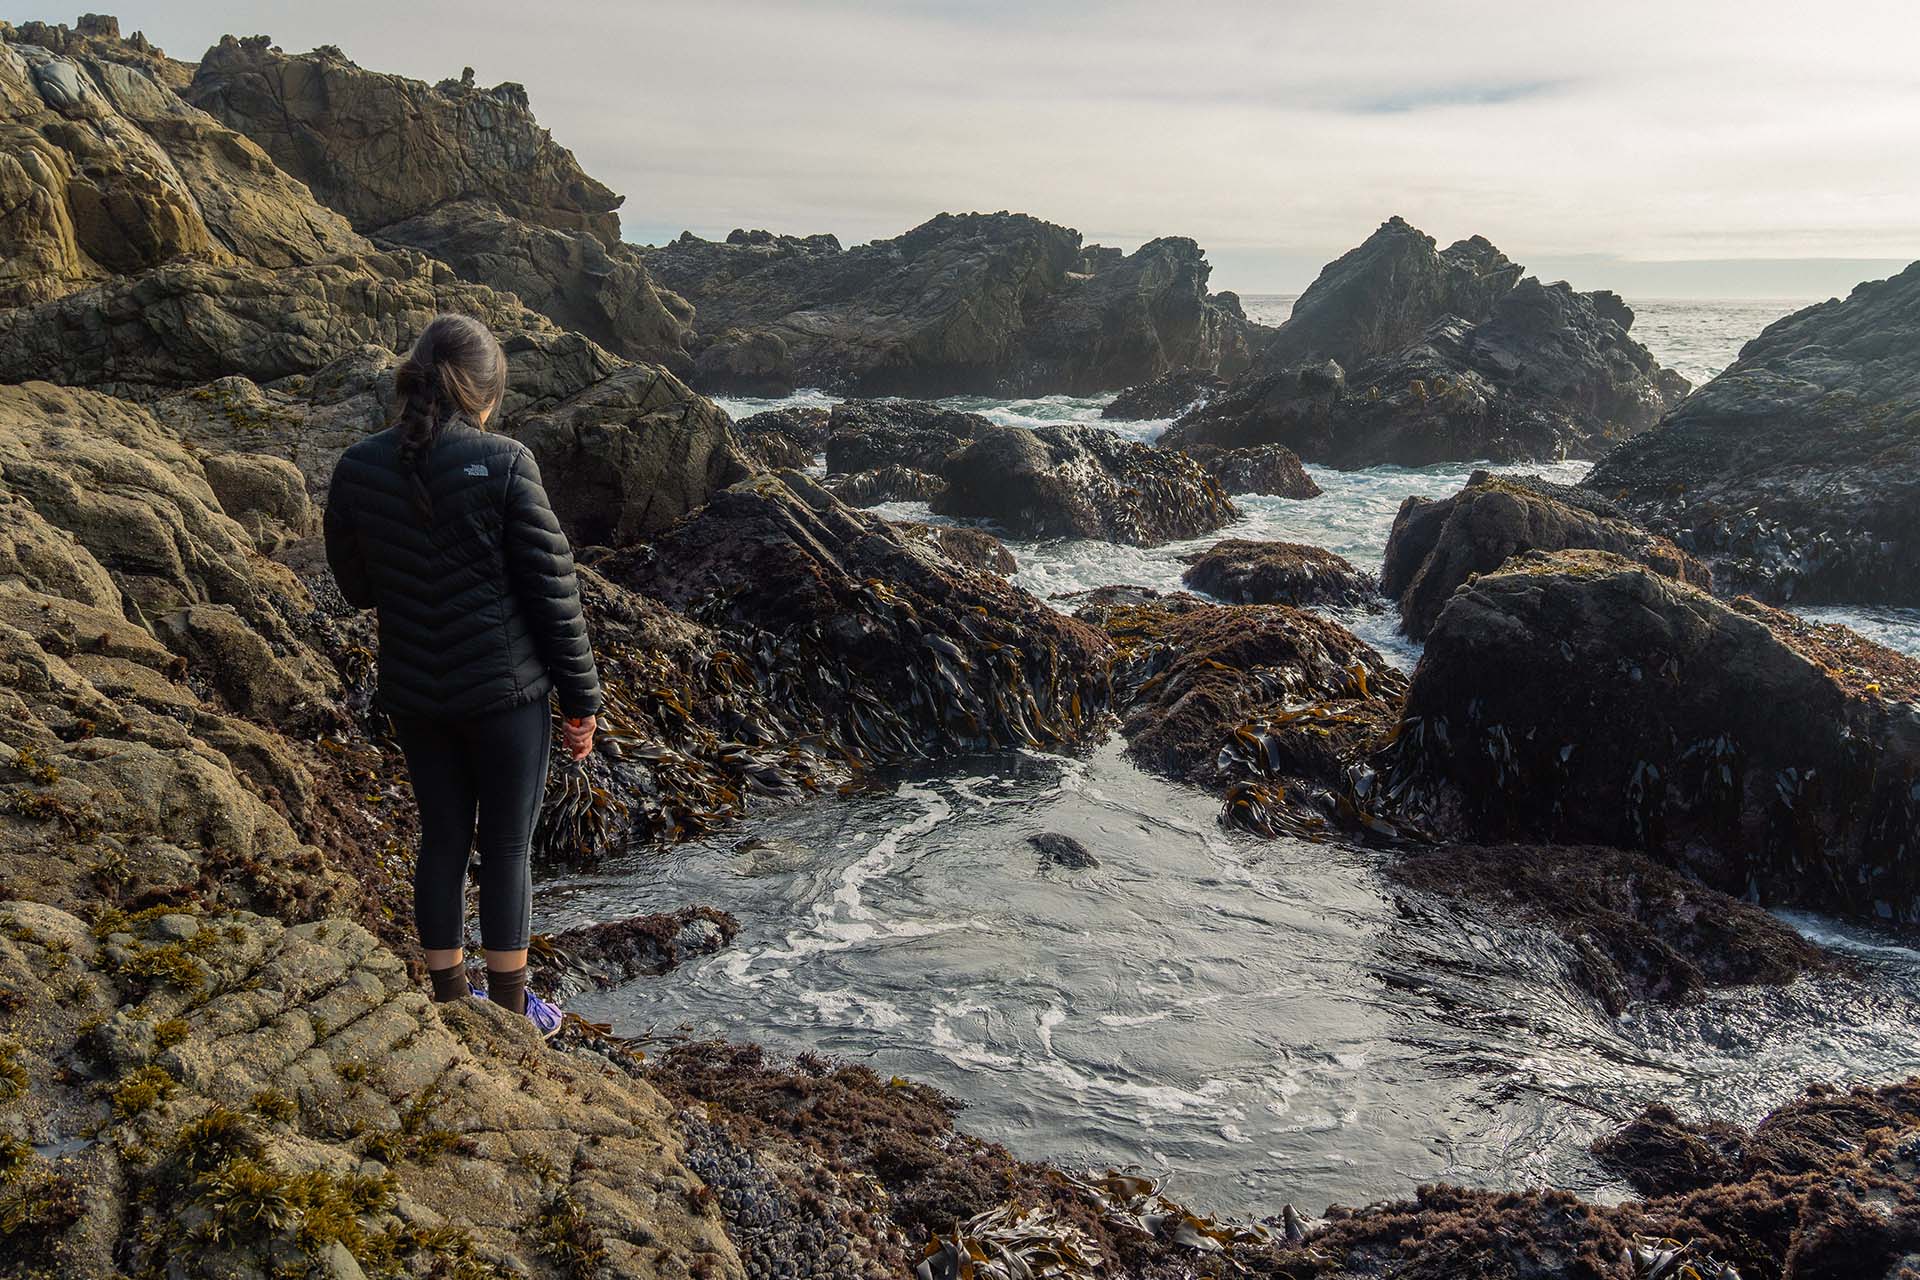 A woman in black stands at the edge of a tidepool looking down toward the water.